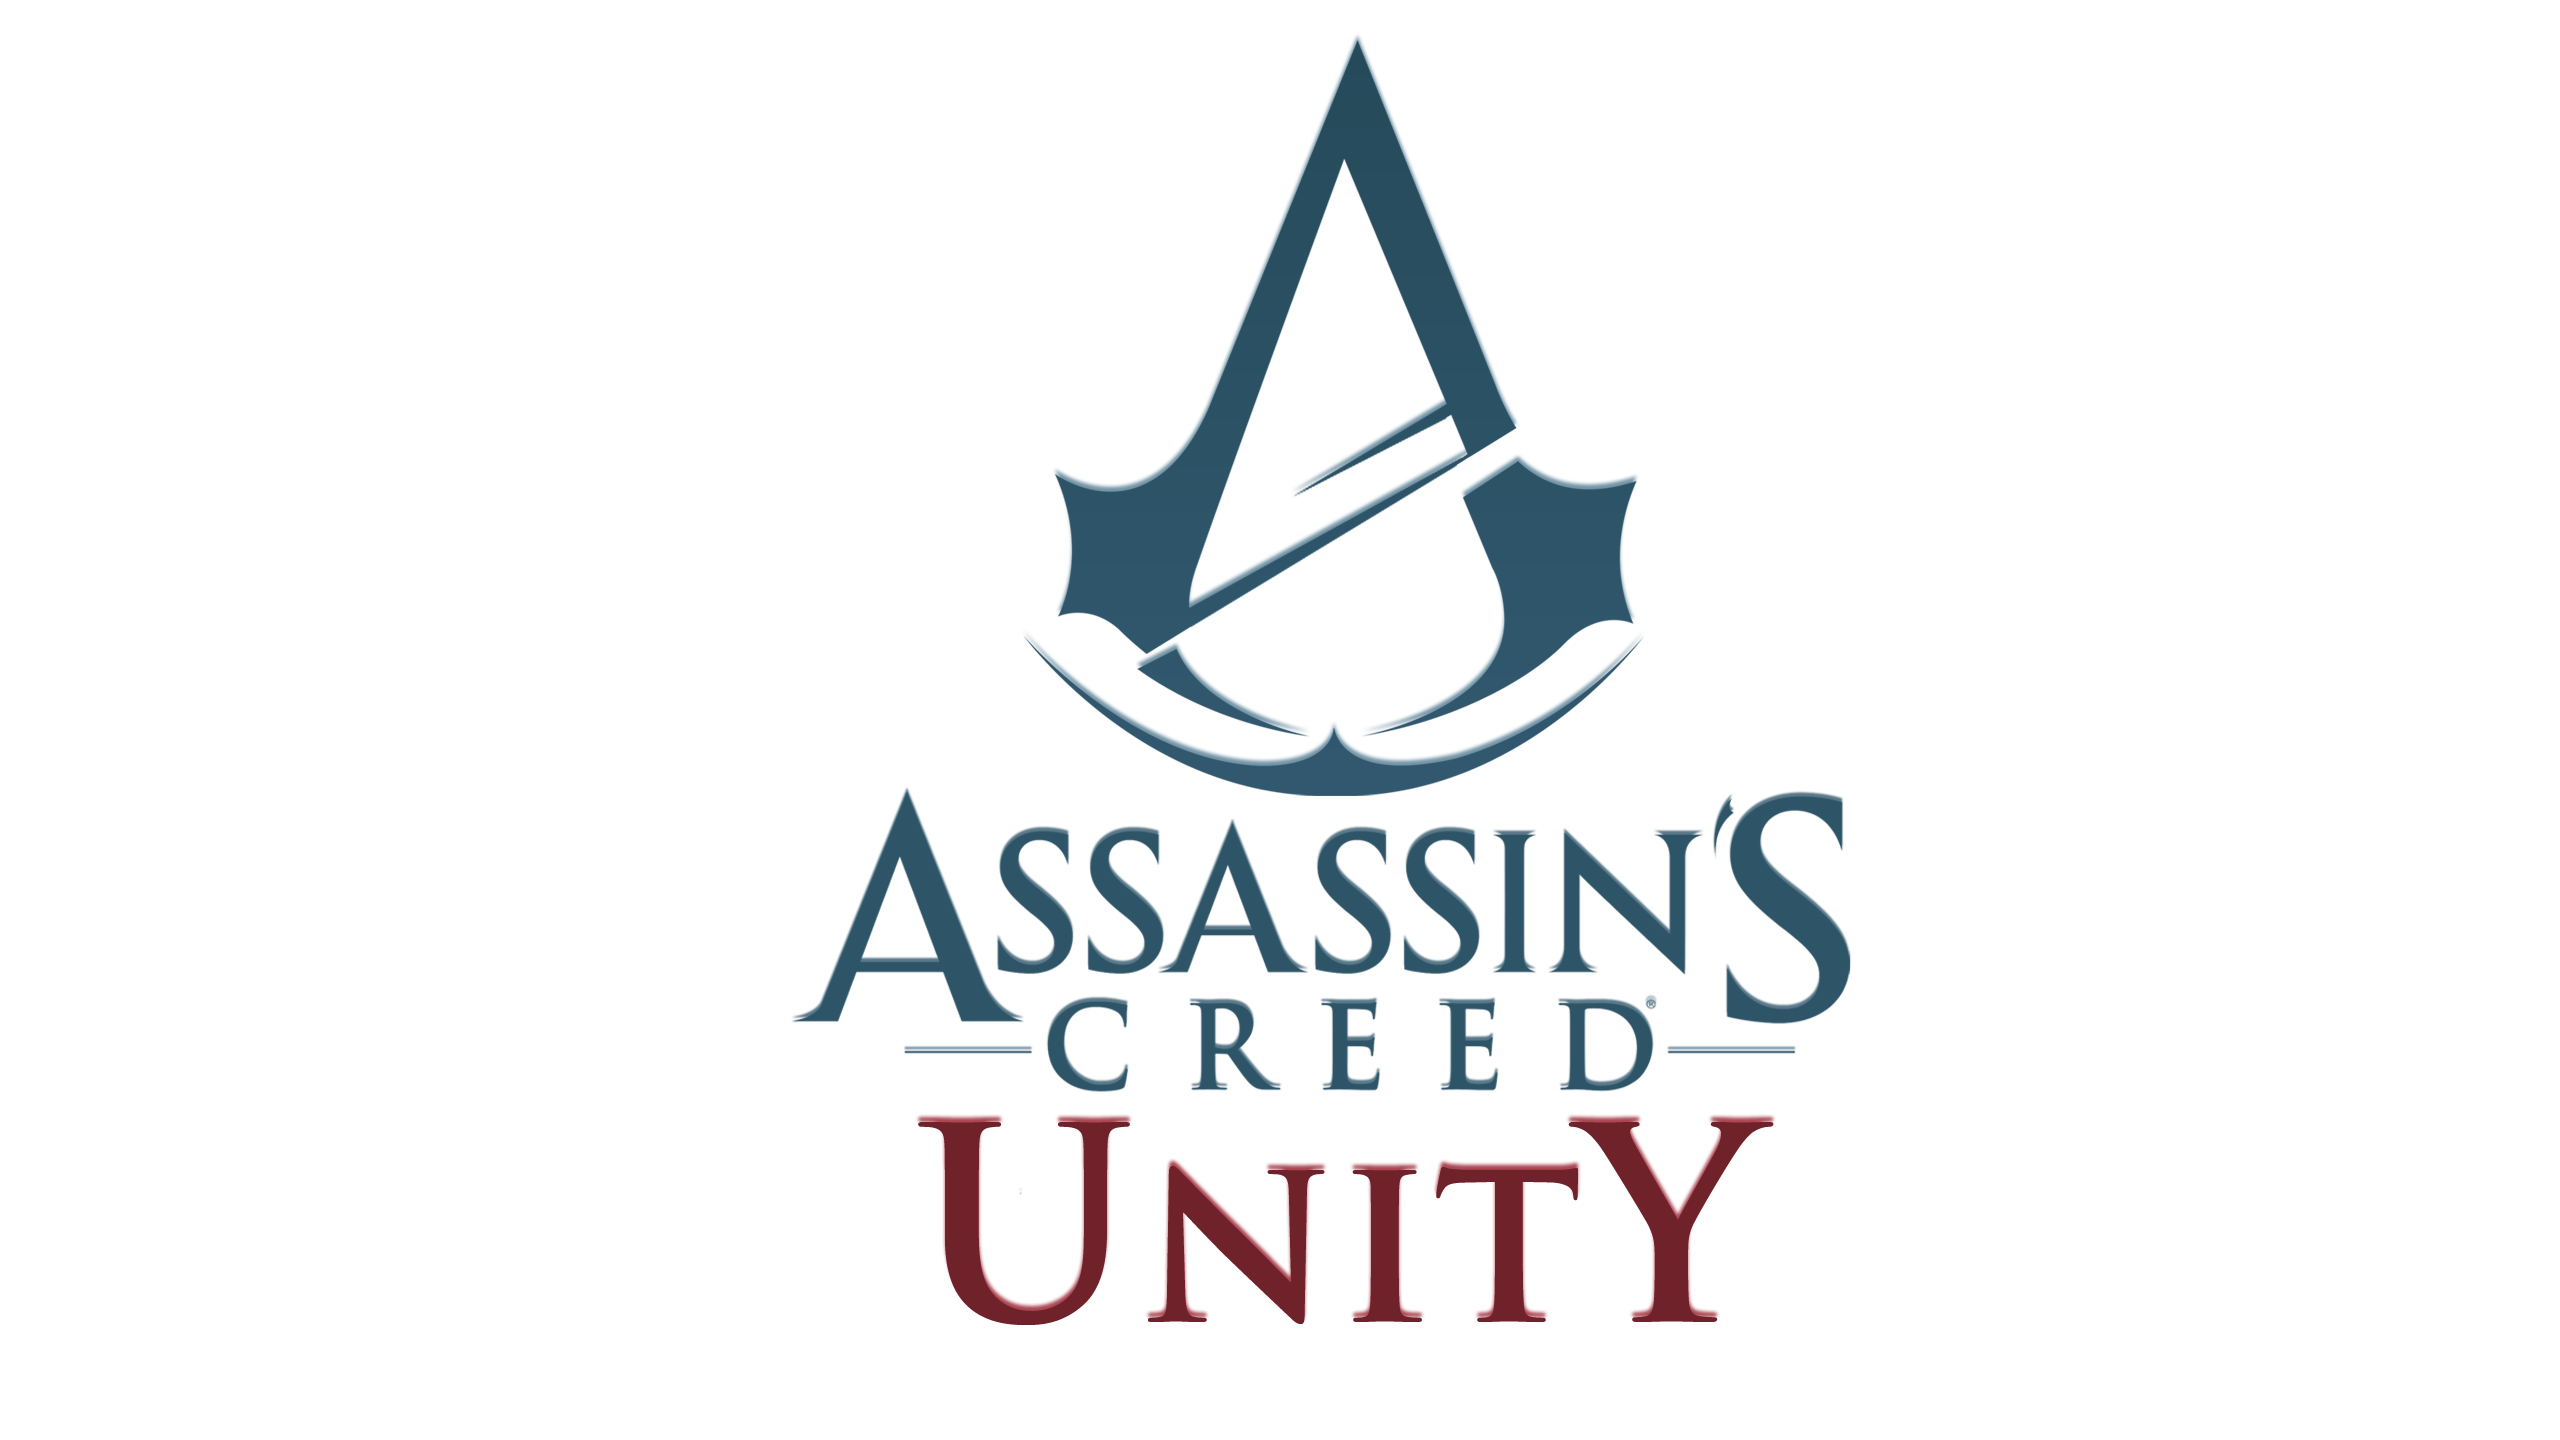 Assassins Creed Unity PNG Pic